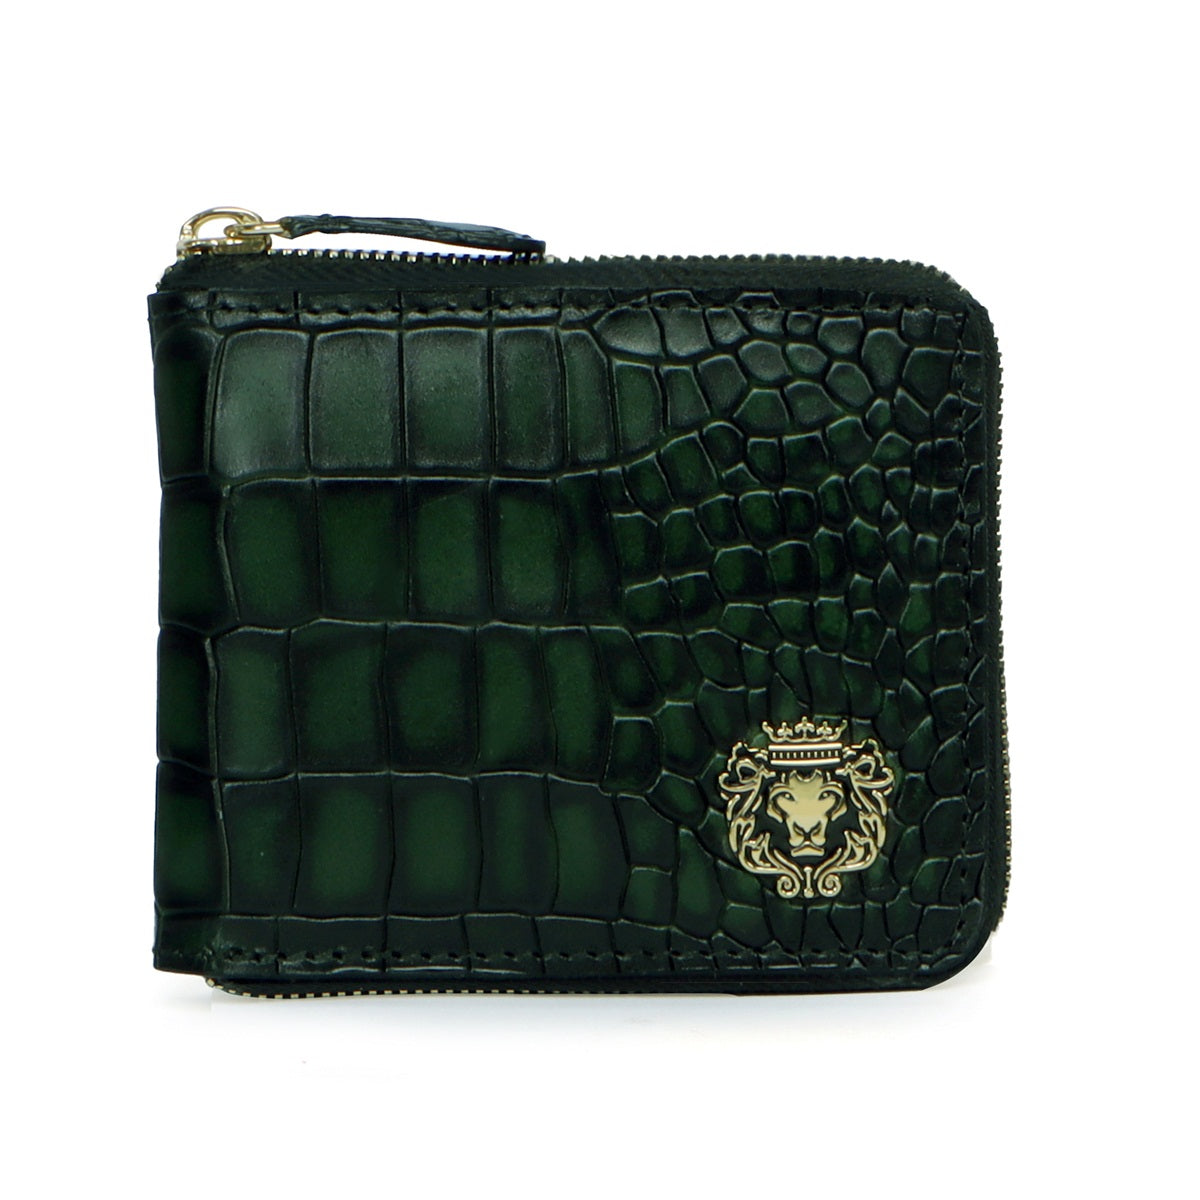 Zip Closure Wallet with Smoky Green Deep Cut Croco Textured Leather